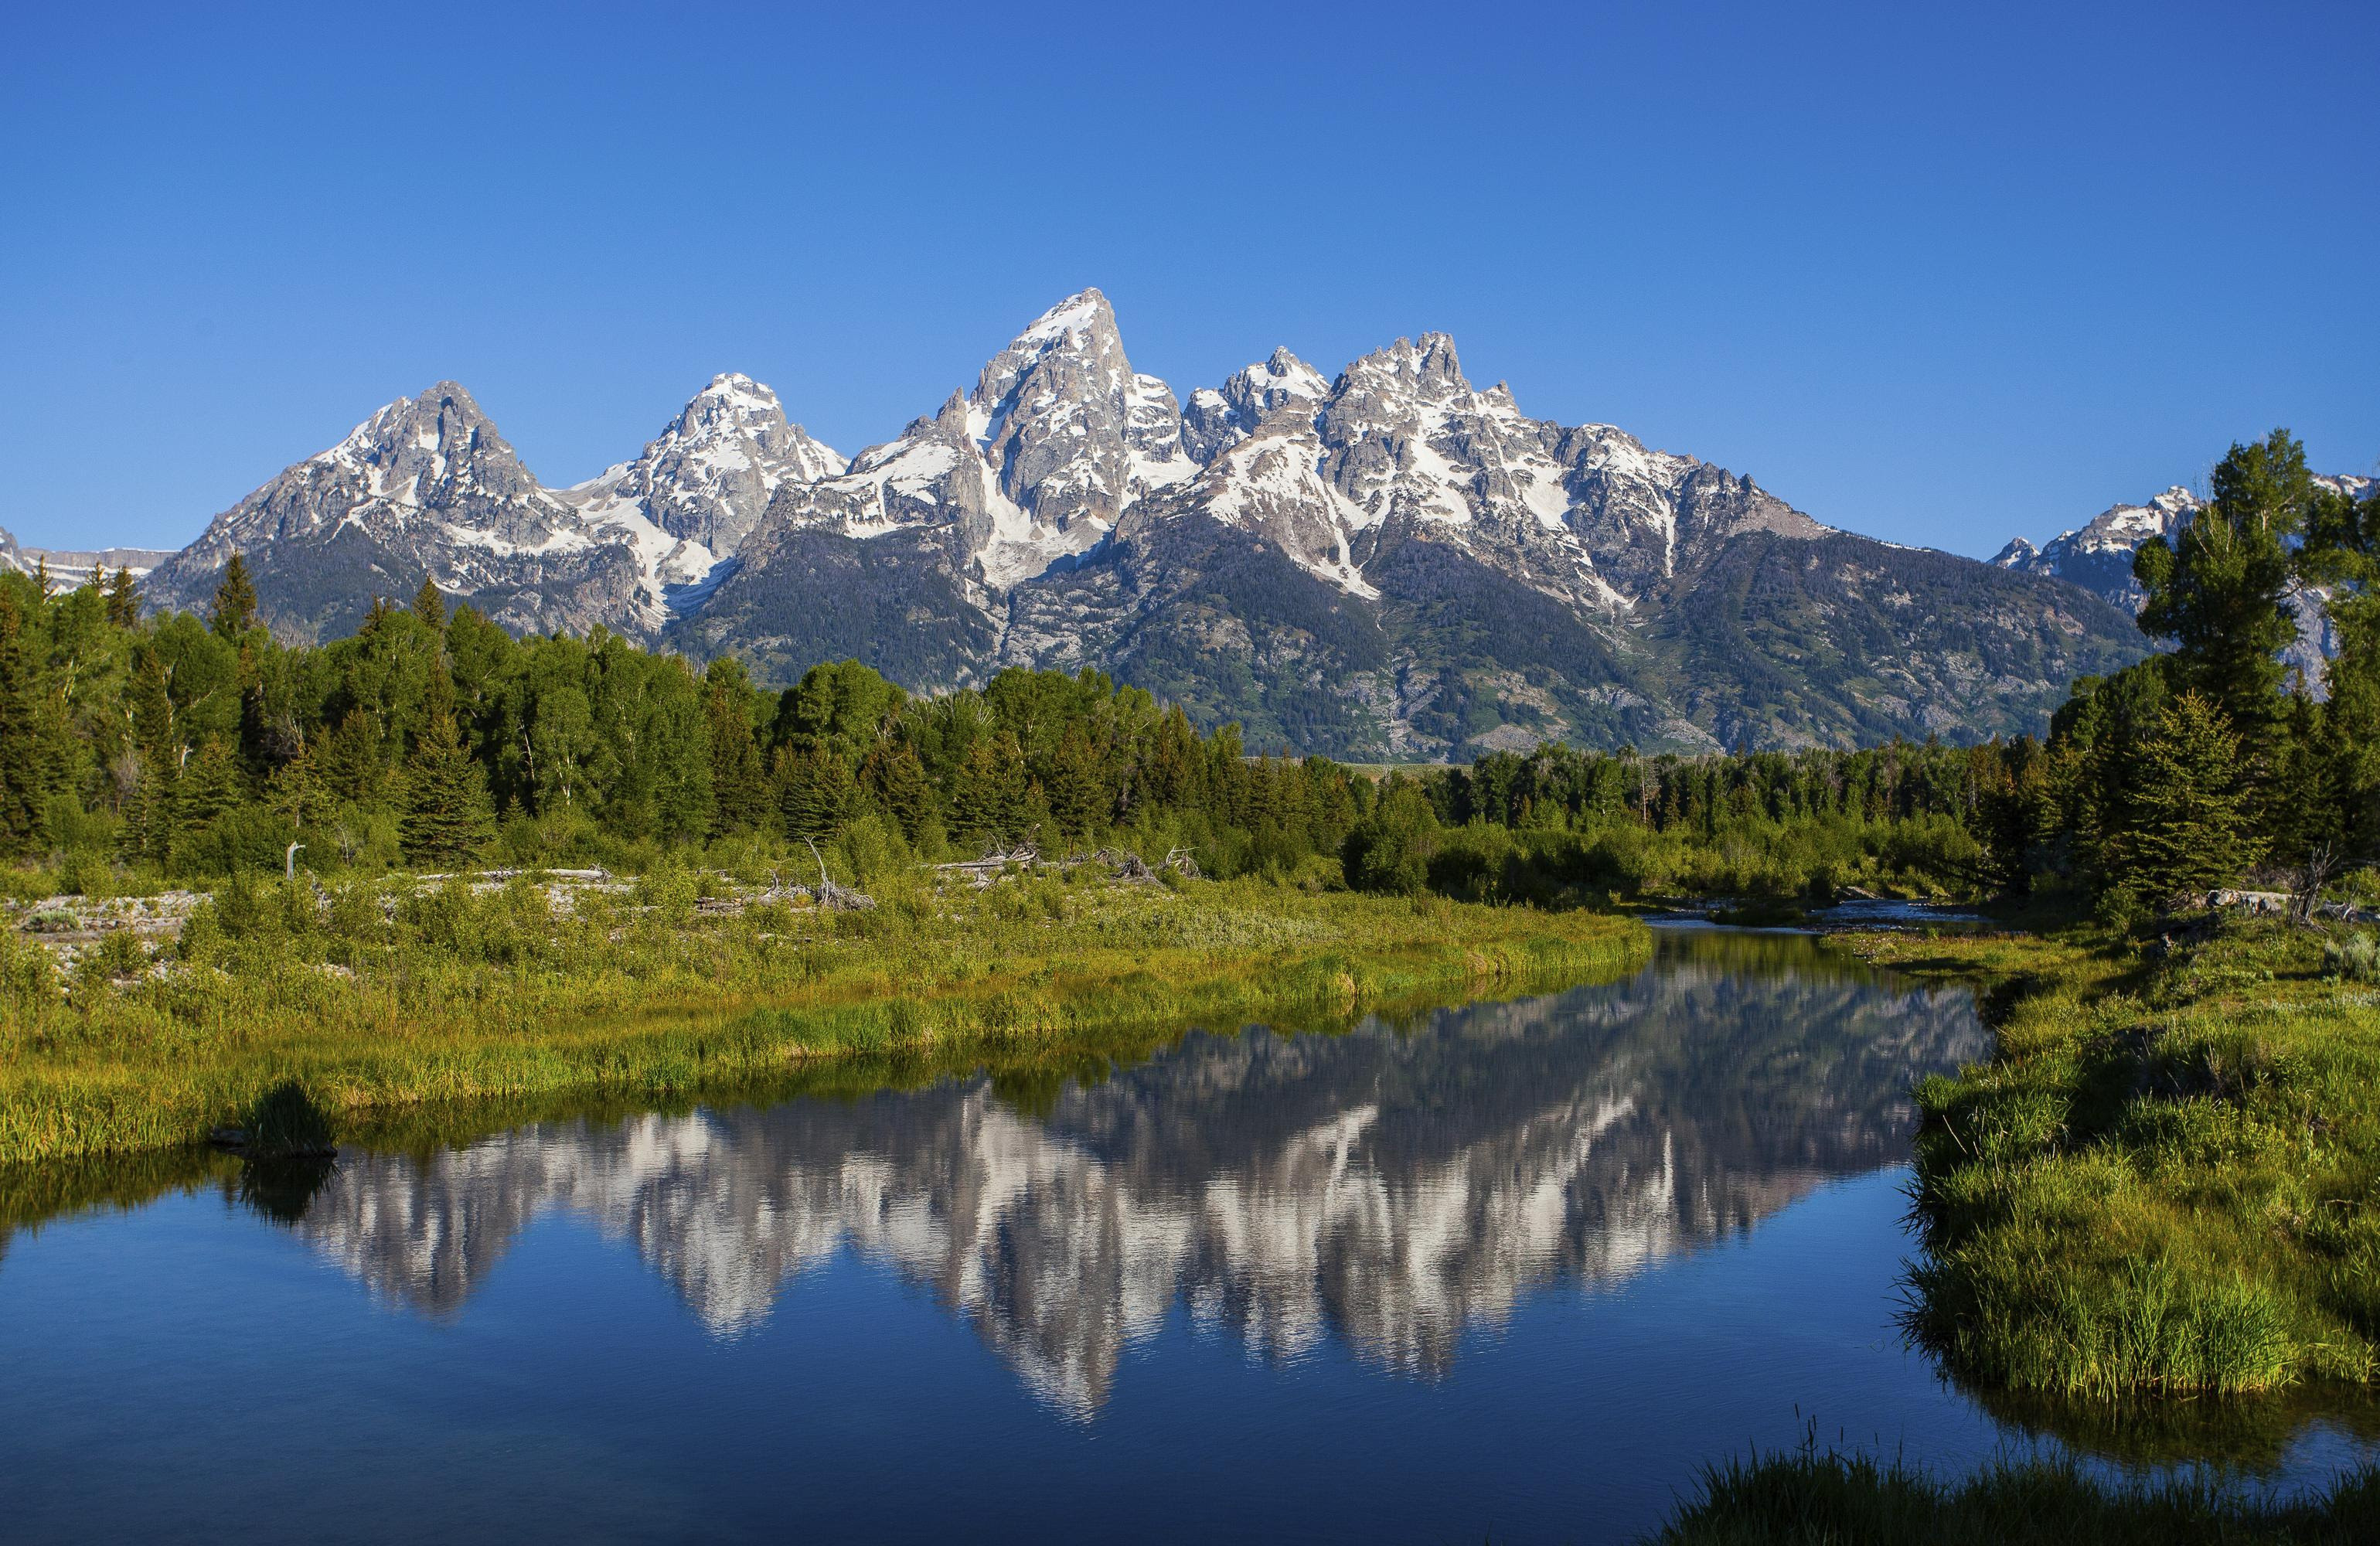 There are 61 mammal species, 17 carnivore species, 6 amphibian species, 6 bat species, and 4 reptile species. How to Spend 1 Day in Grand Teton National Park 2021 Travel